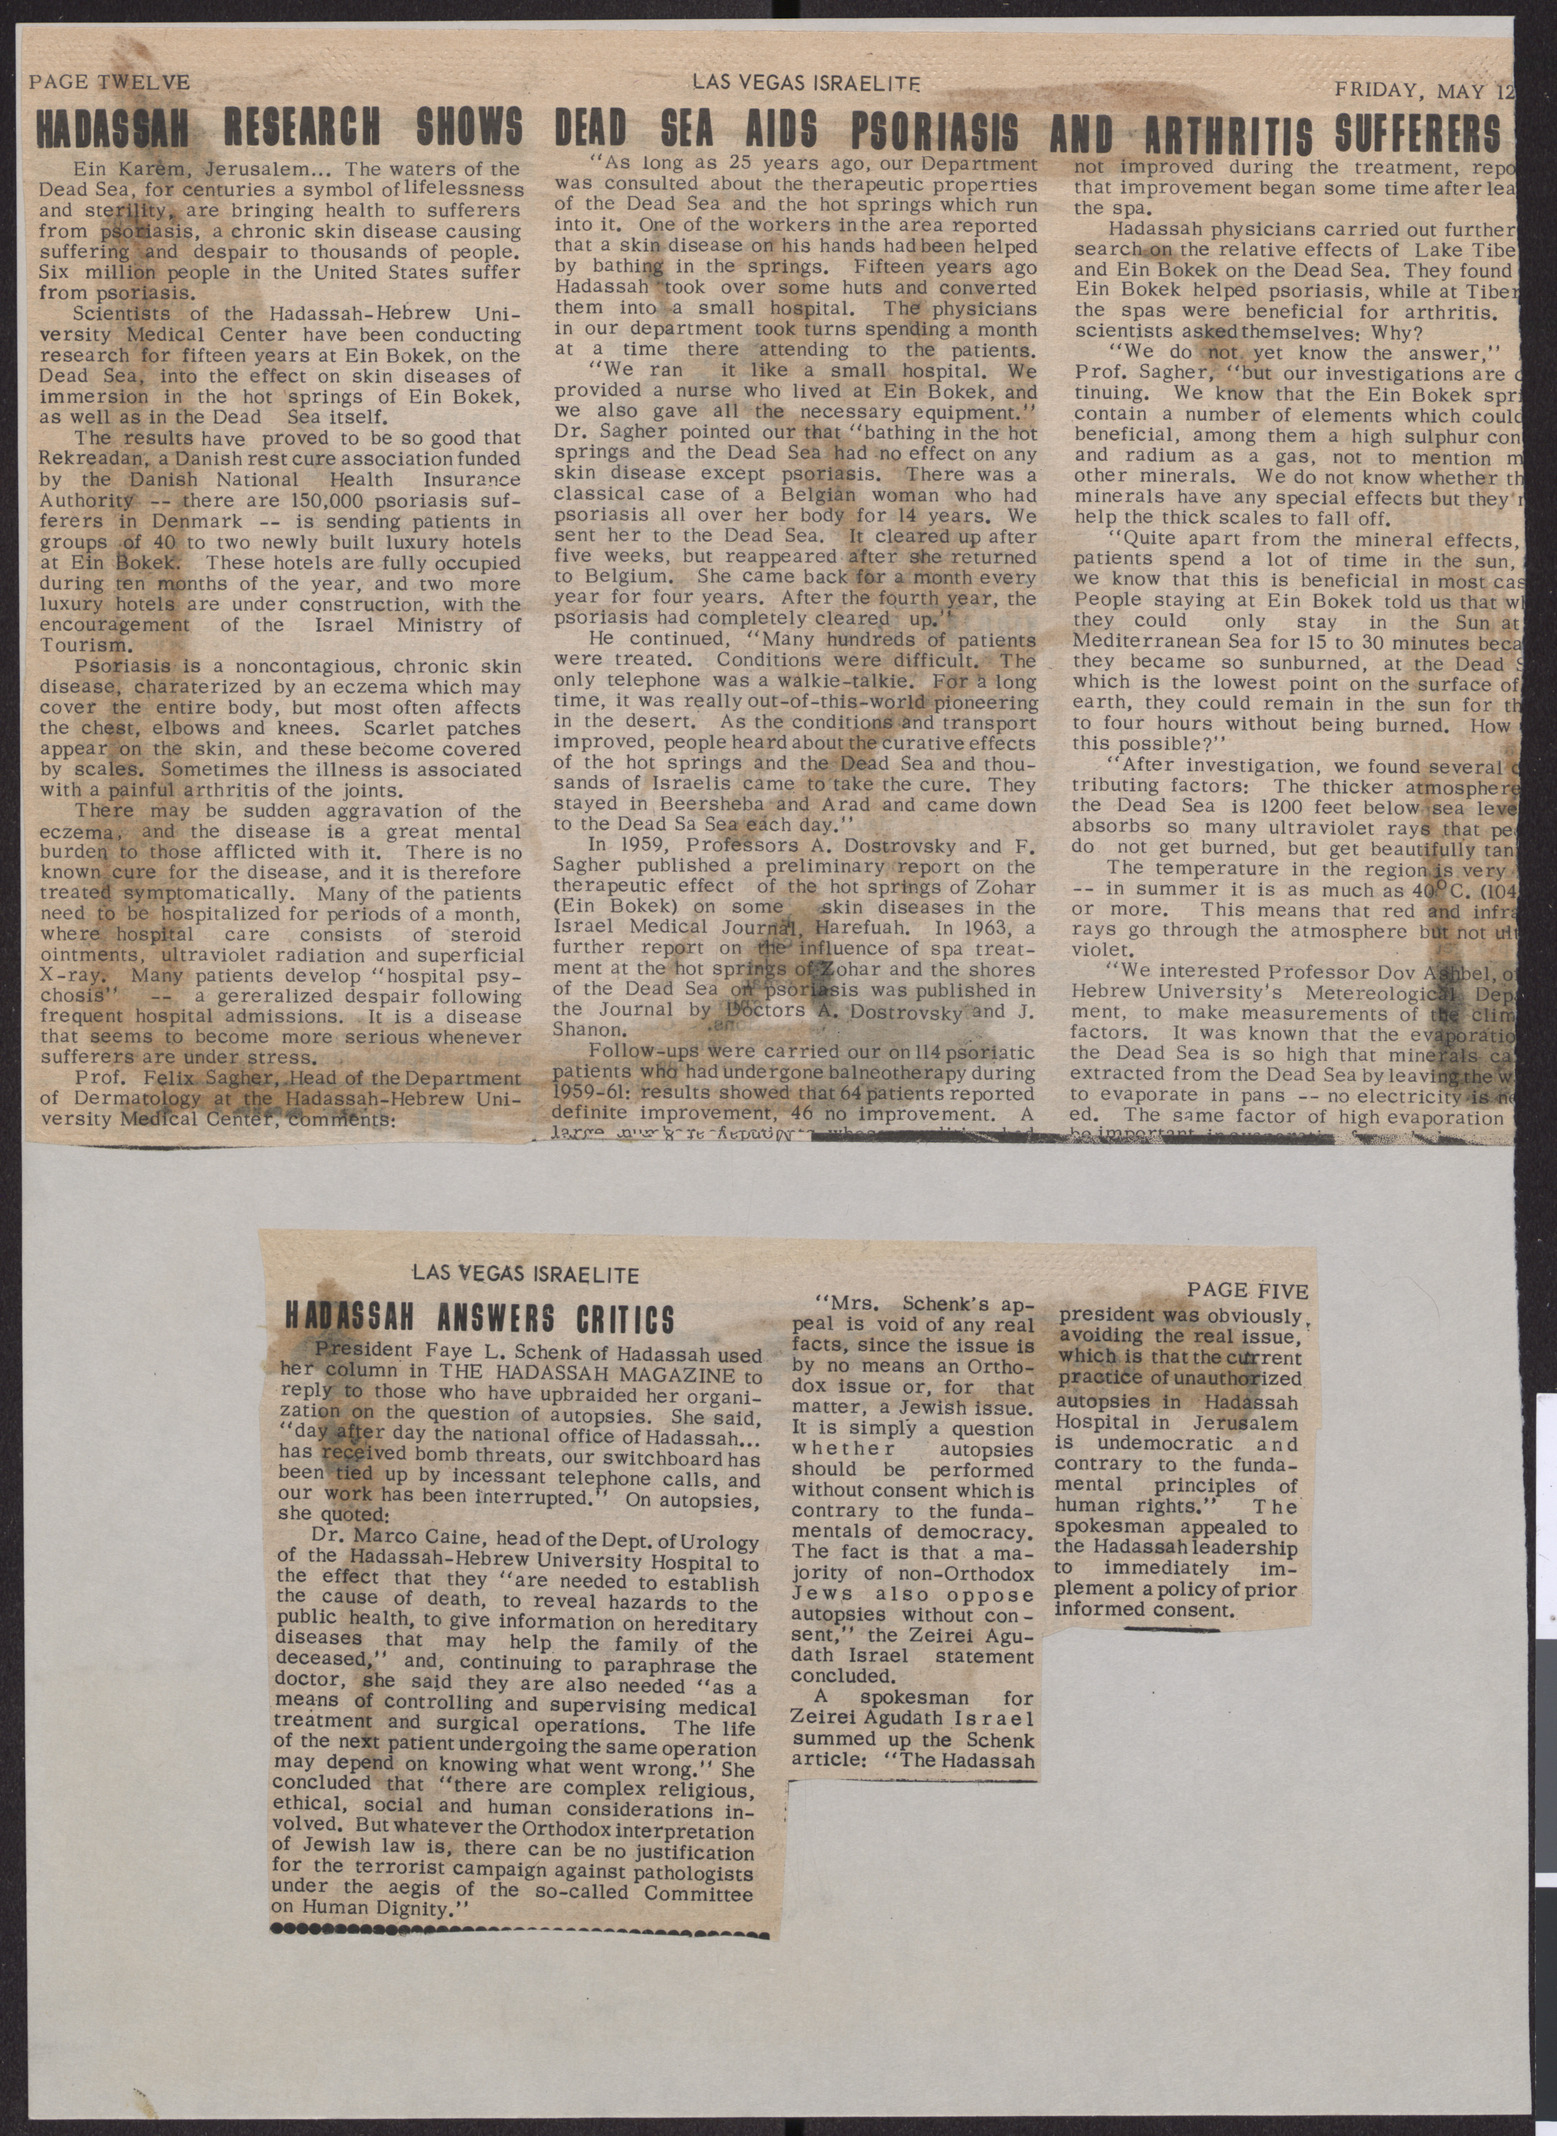 Newspaper clippings about Hadassah research on arthritis and autopsies, 1972